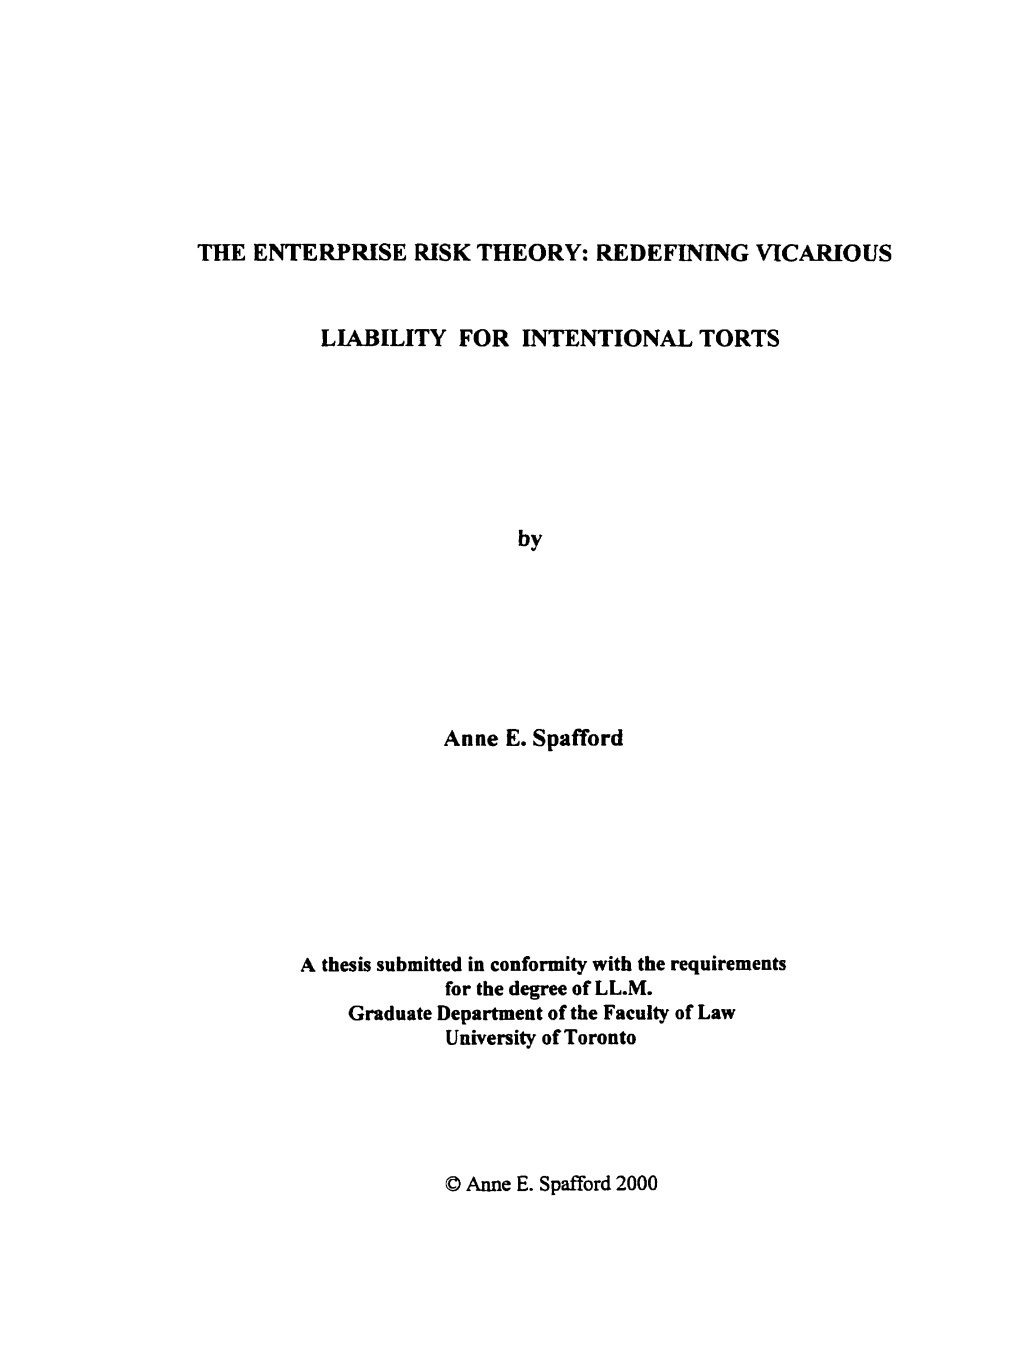 The Enterprise Risk Theory: Redefimng Vicarious